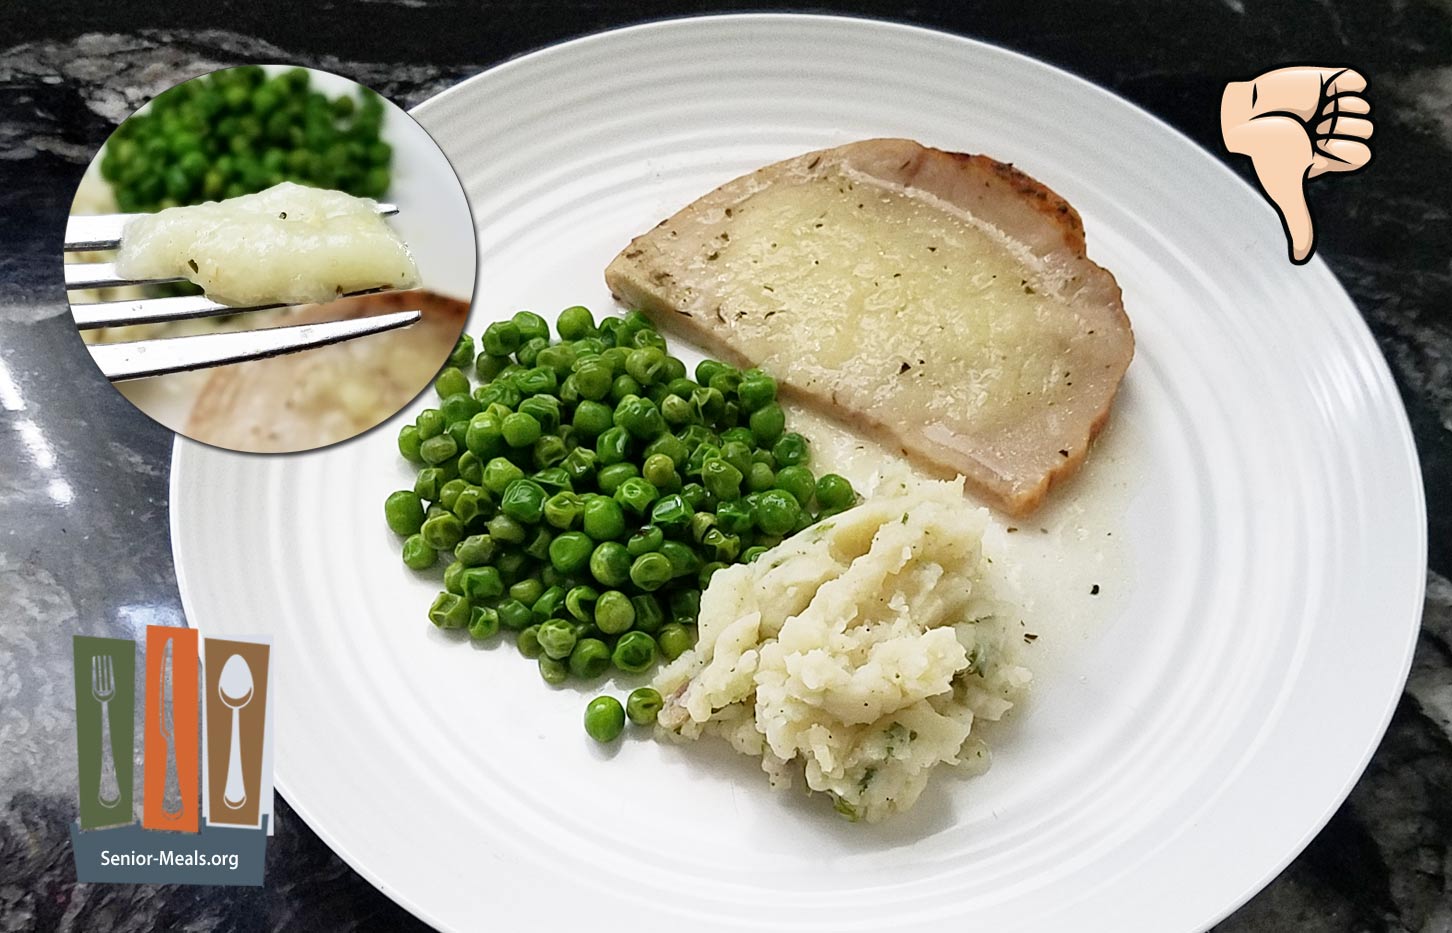 MK Signature Meal - Roast Turkey with Gravy and Mashed Potatoes with Peas - $12.50